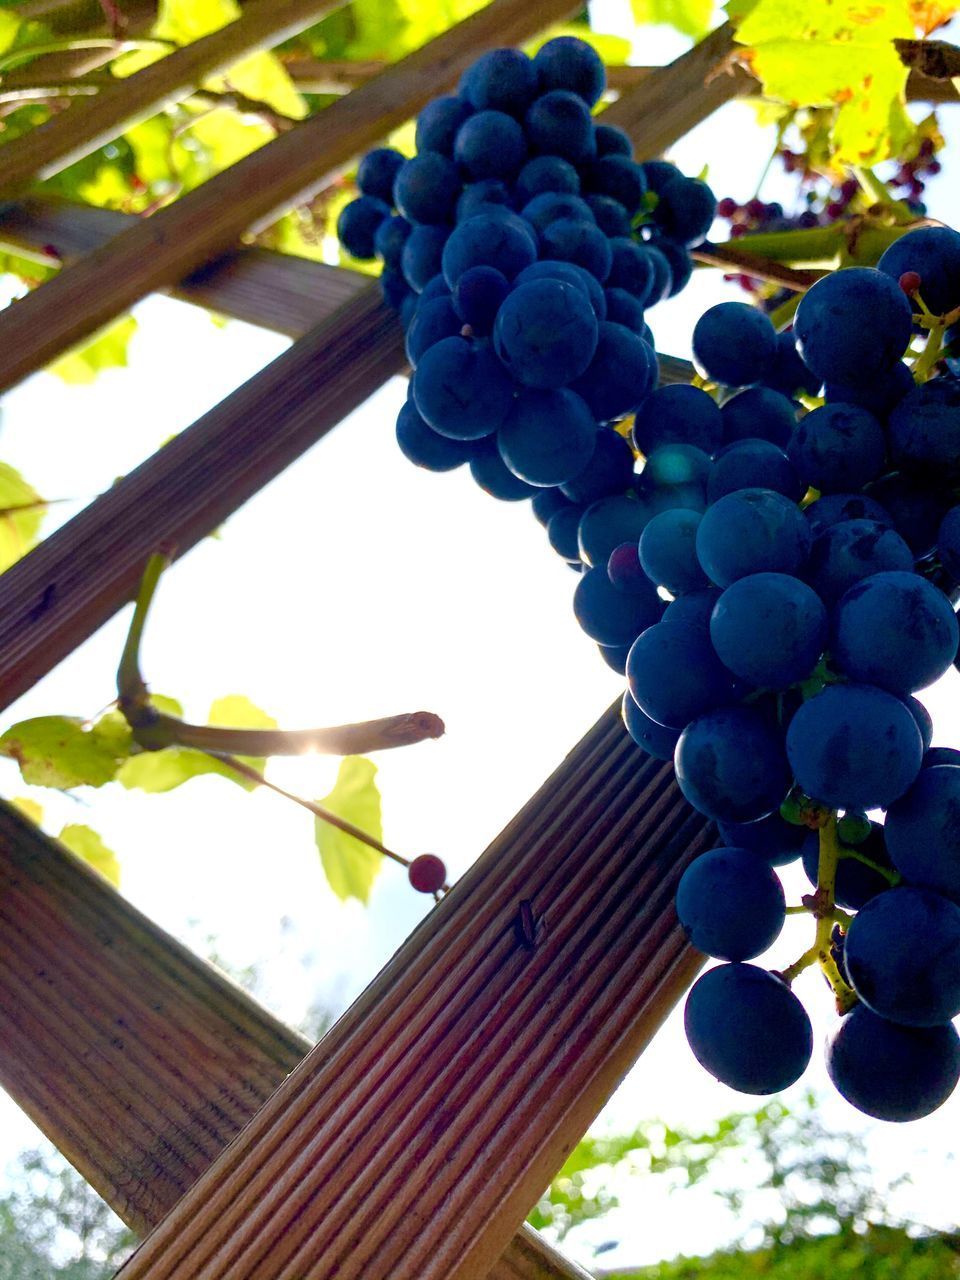 LOW ANGLE VIEW OF GRAPES GROWING ON TREE